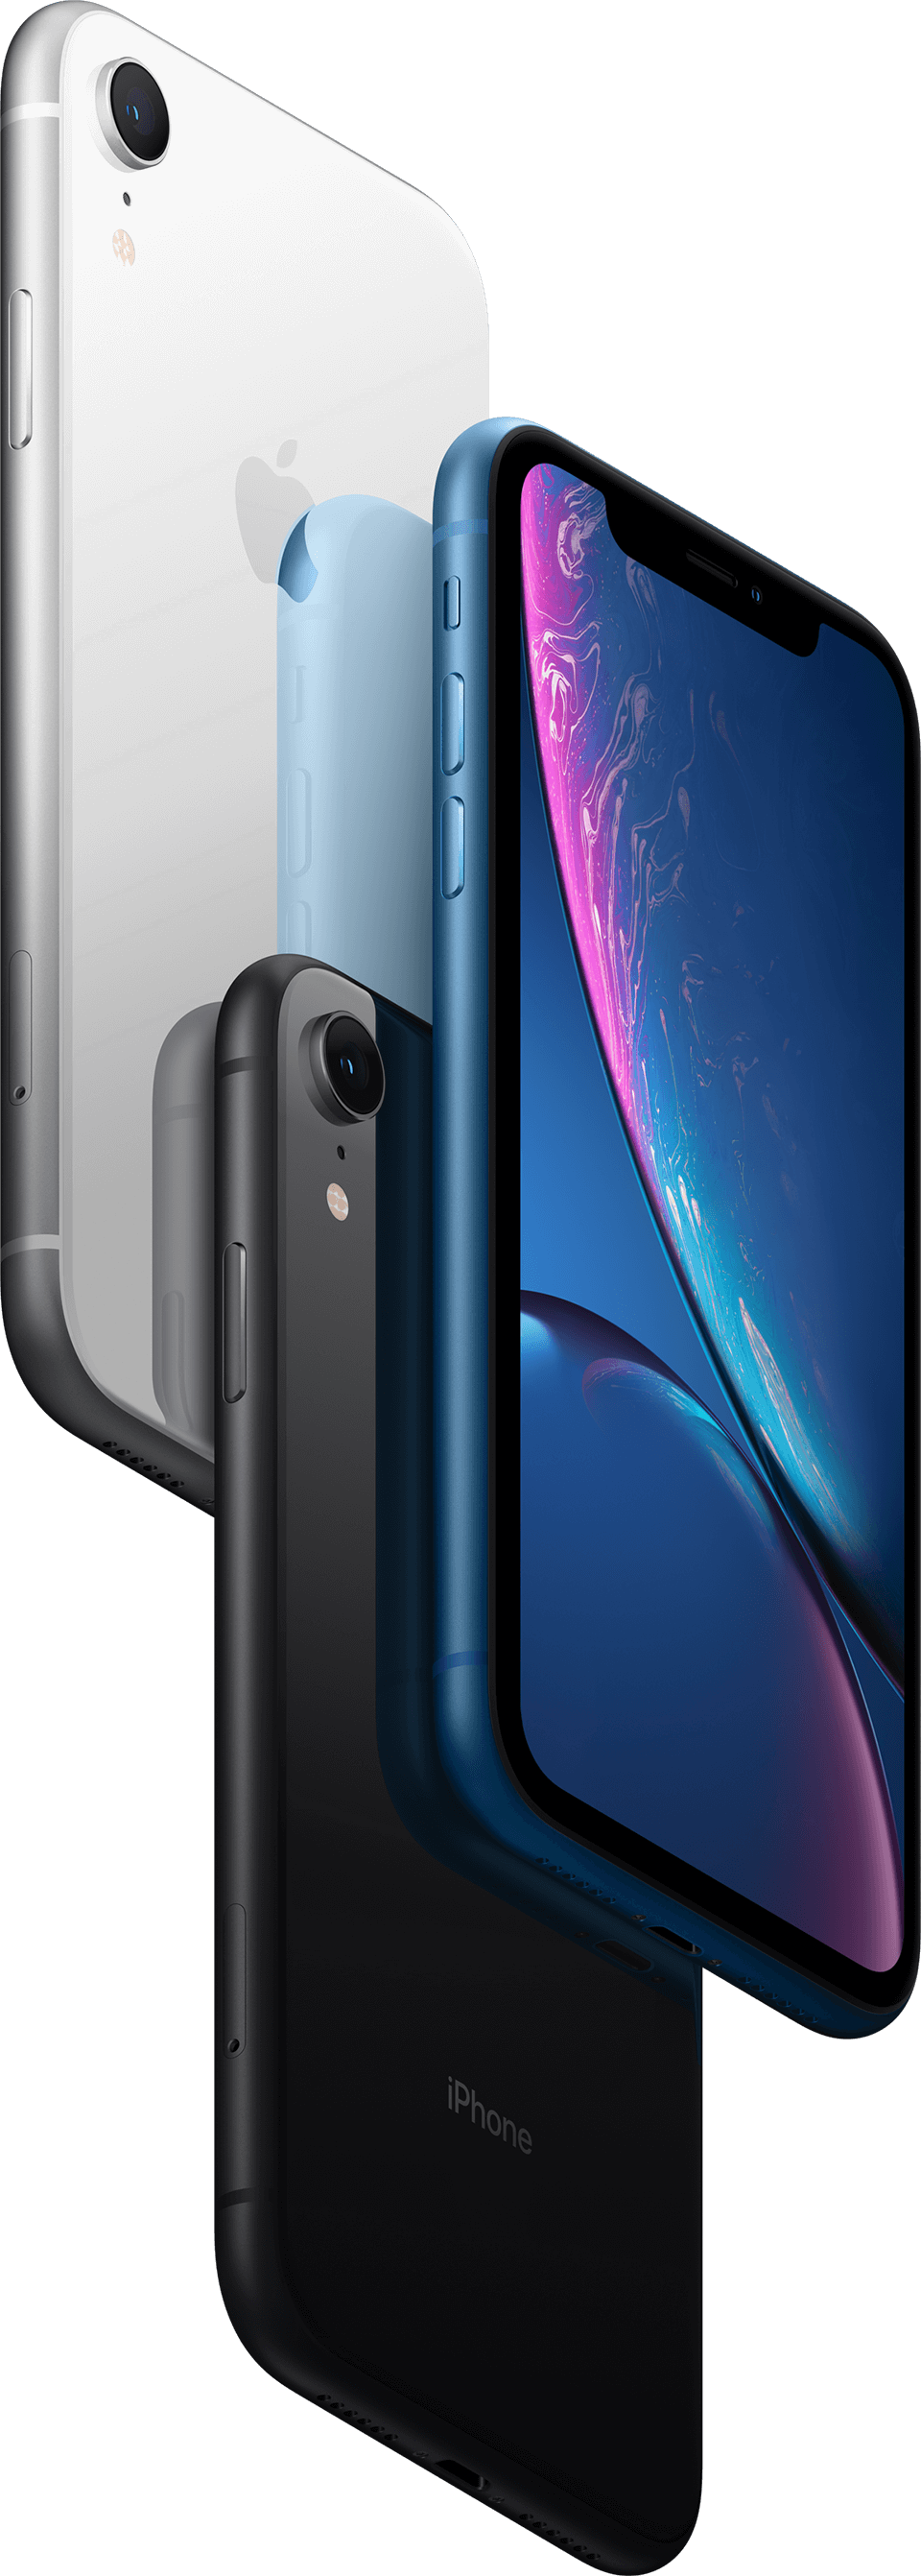 Apple iPhone XR: Specs, Features, Colors, Price | 2018 Release | T